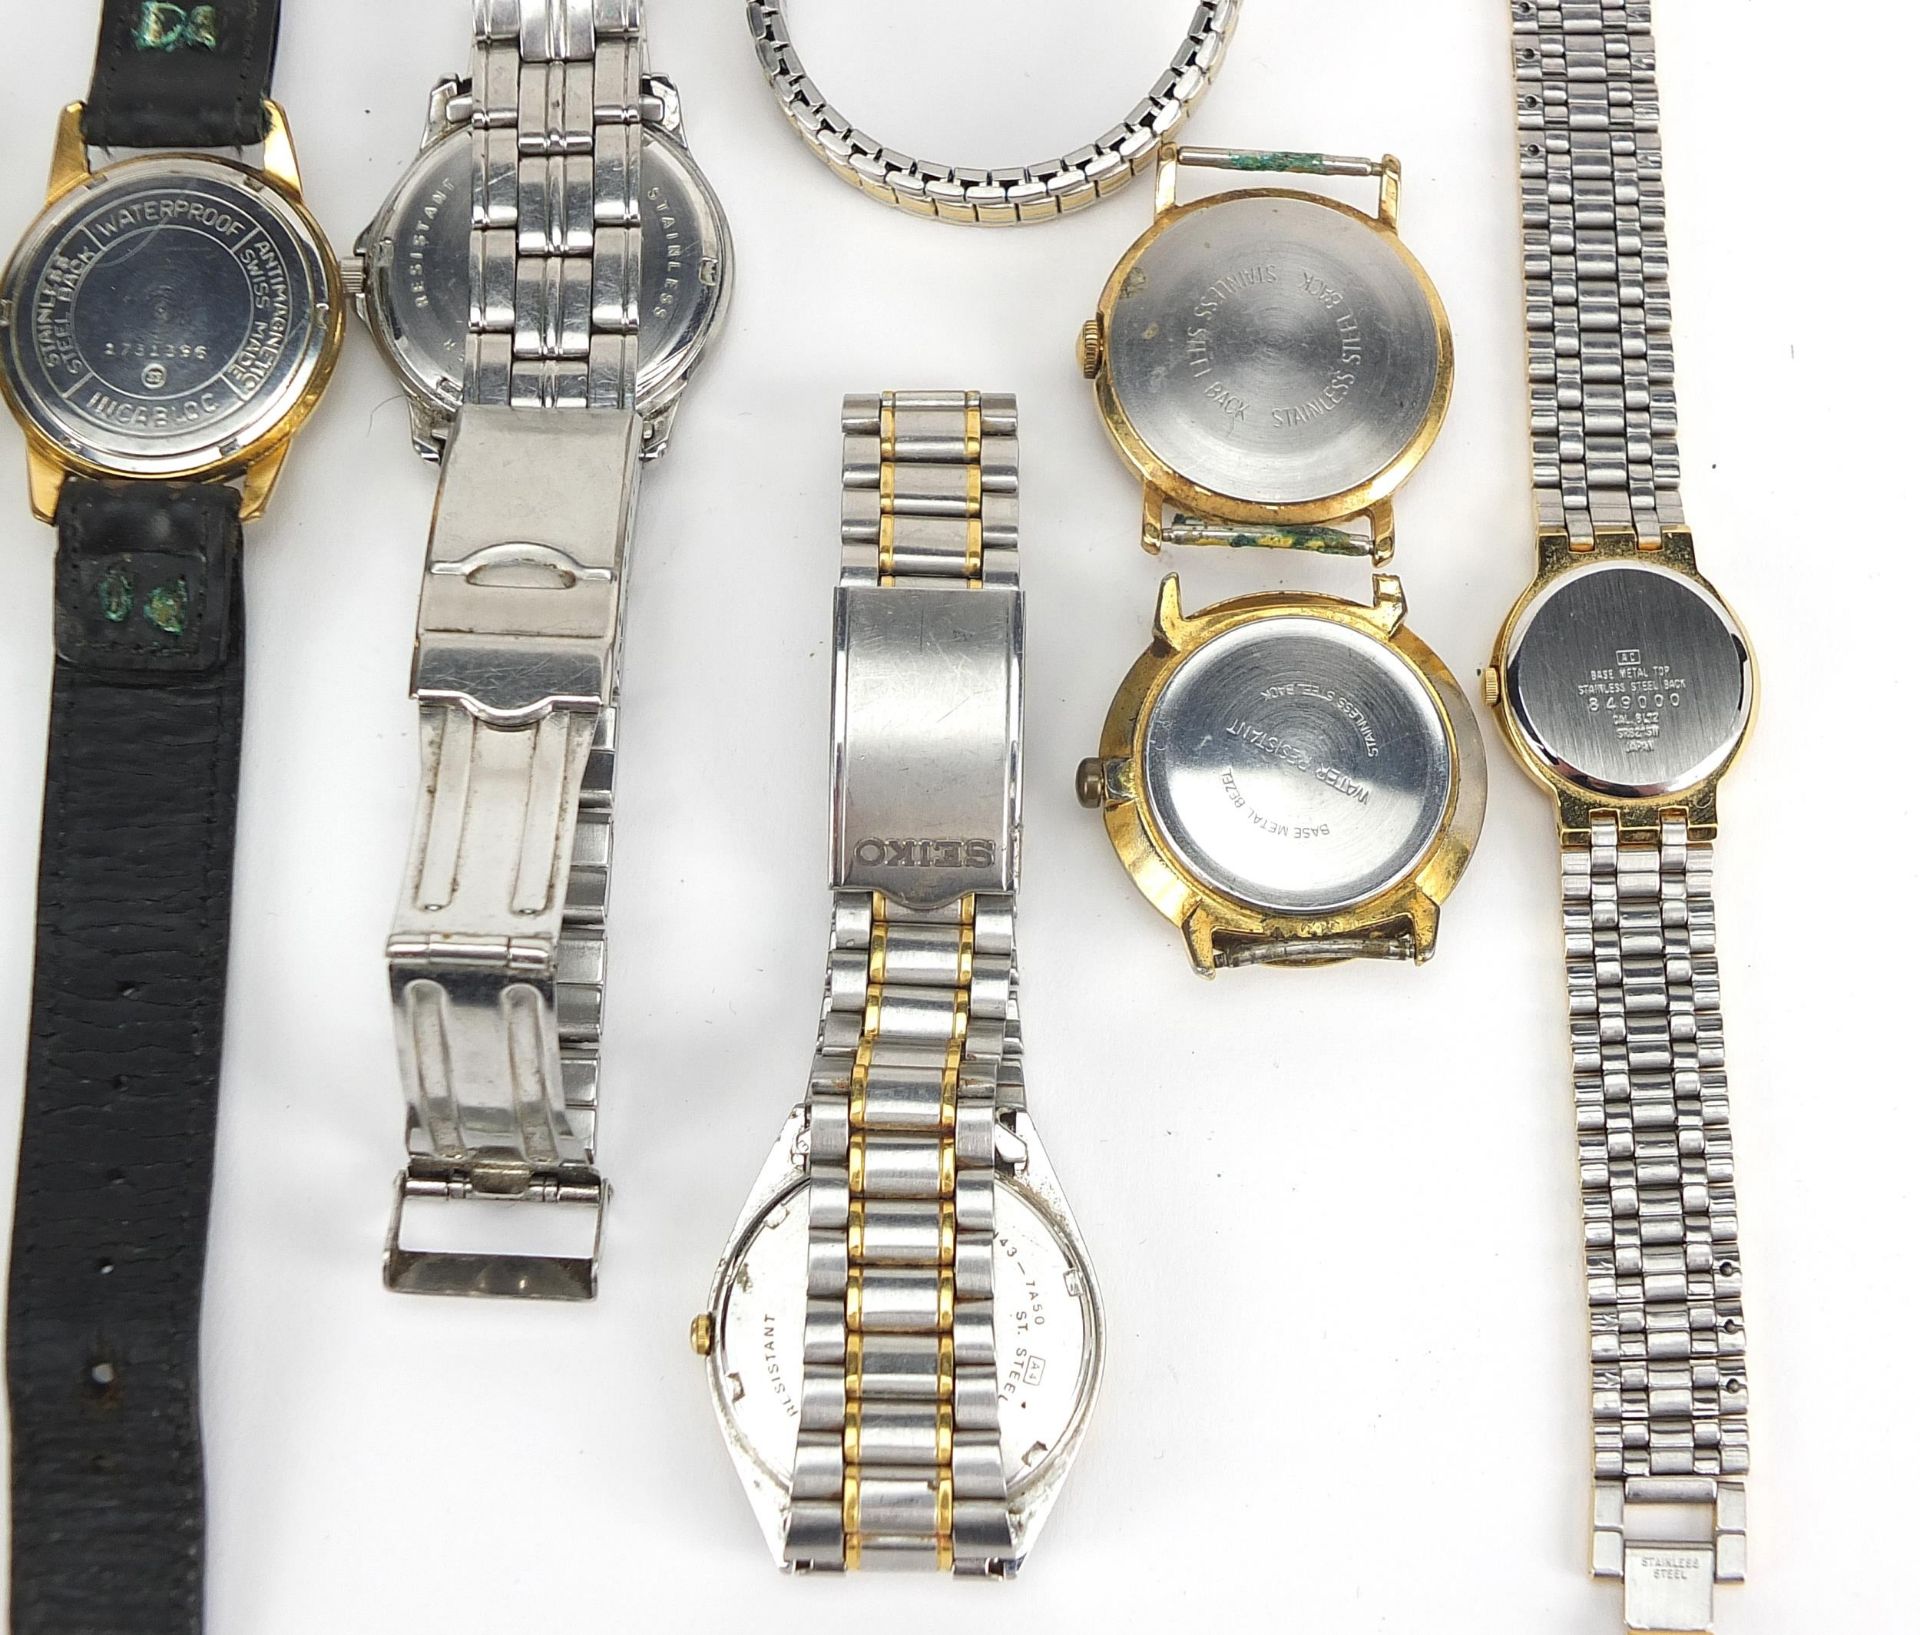 Vintage and later gentlemen's and ladies wristwatches including Renel, Timex, Seiko and Oris - Image 7 of 7